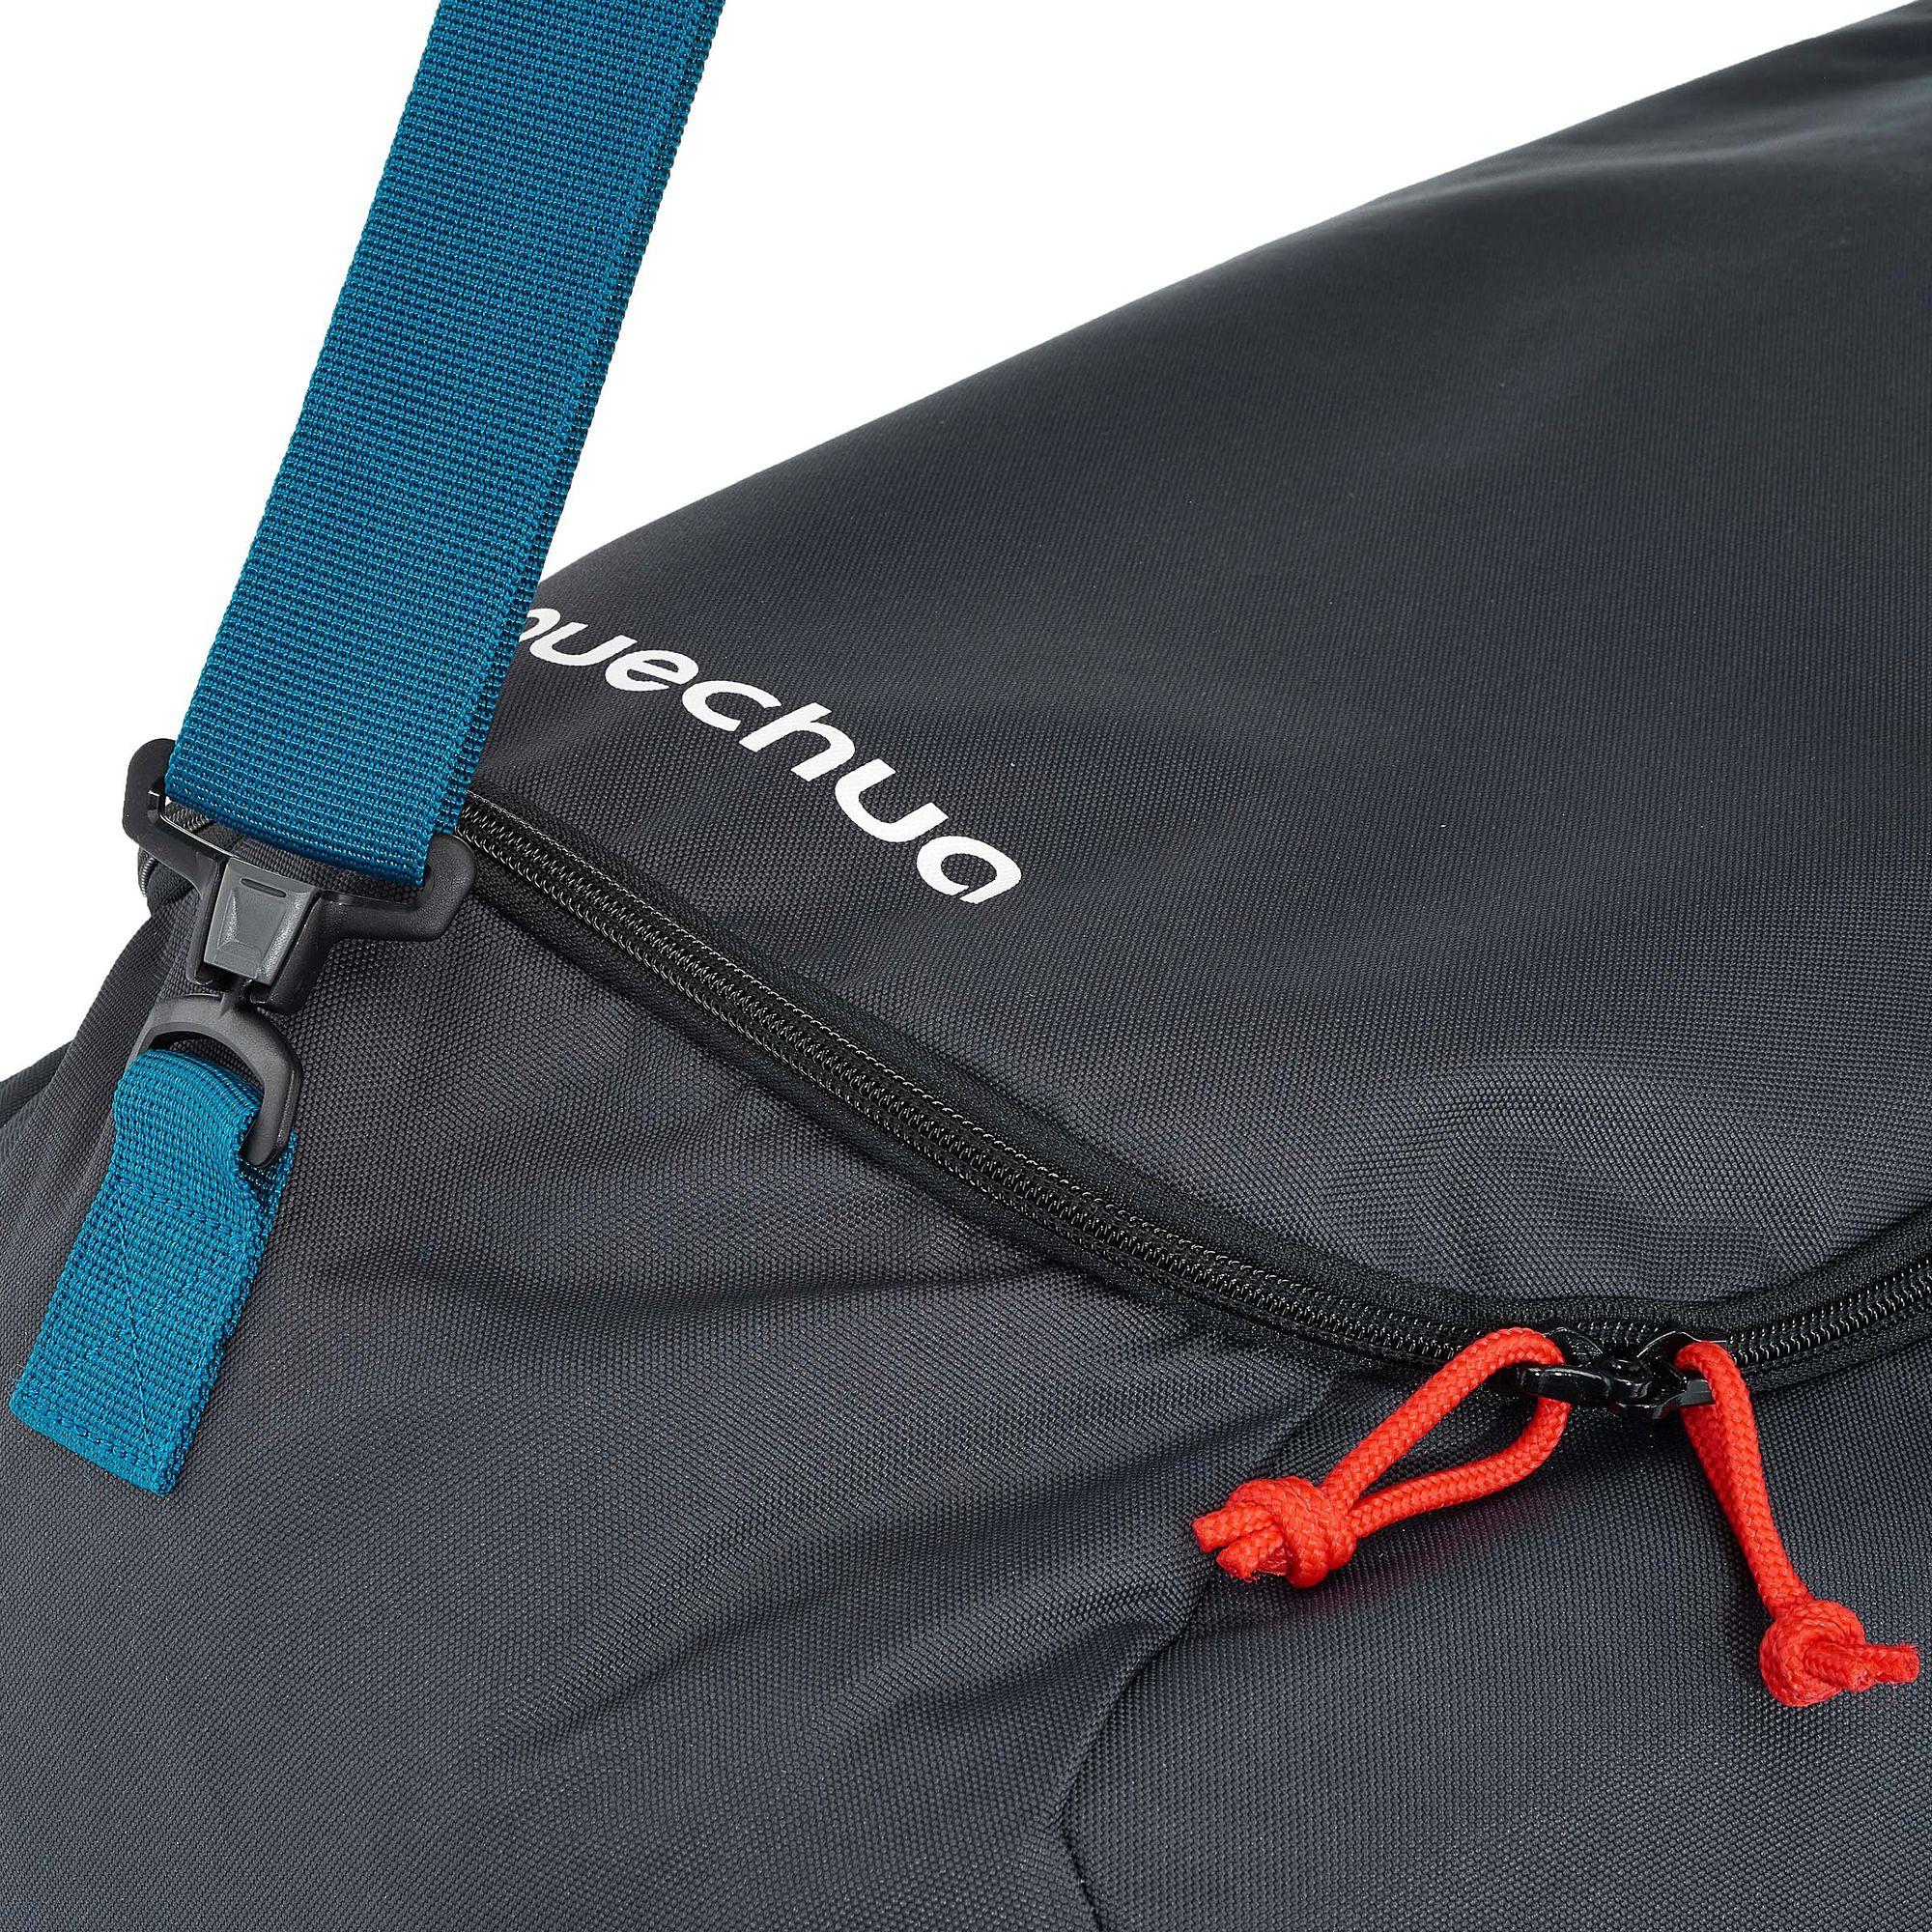 quechua airplanes and protective cover